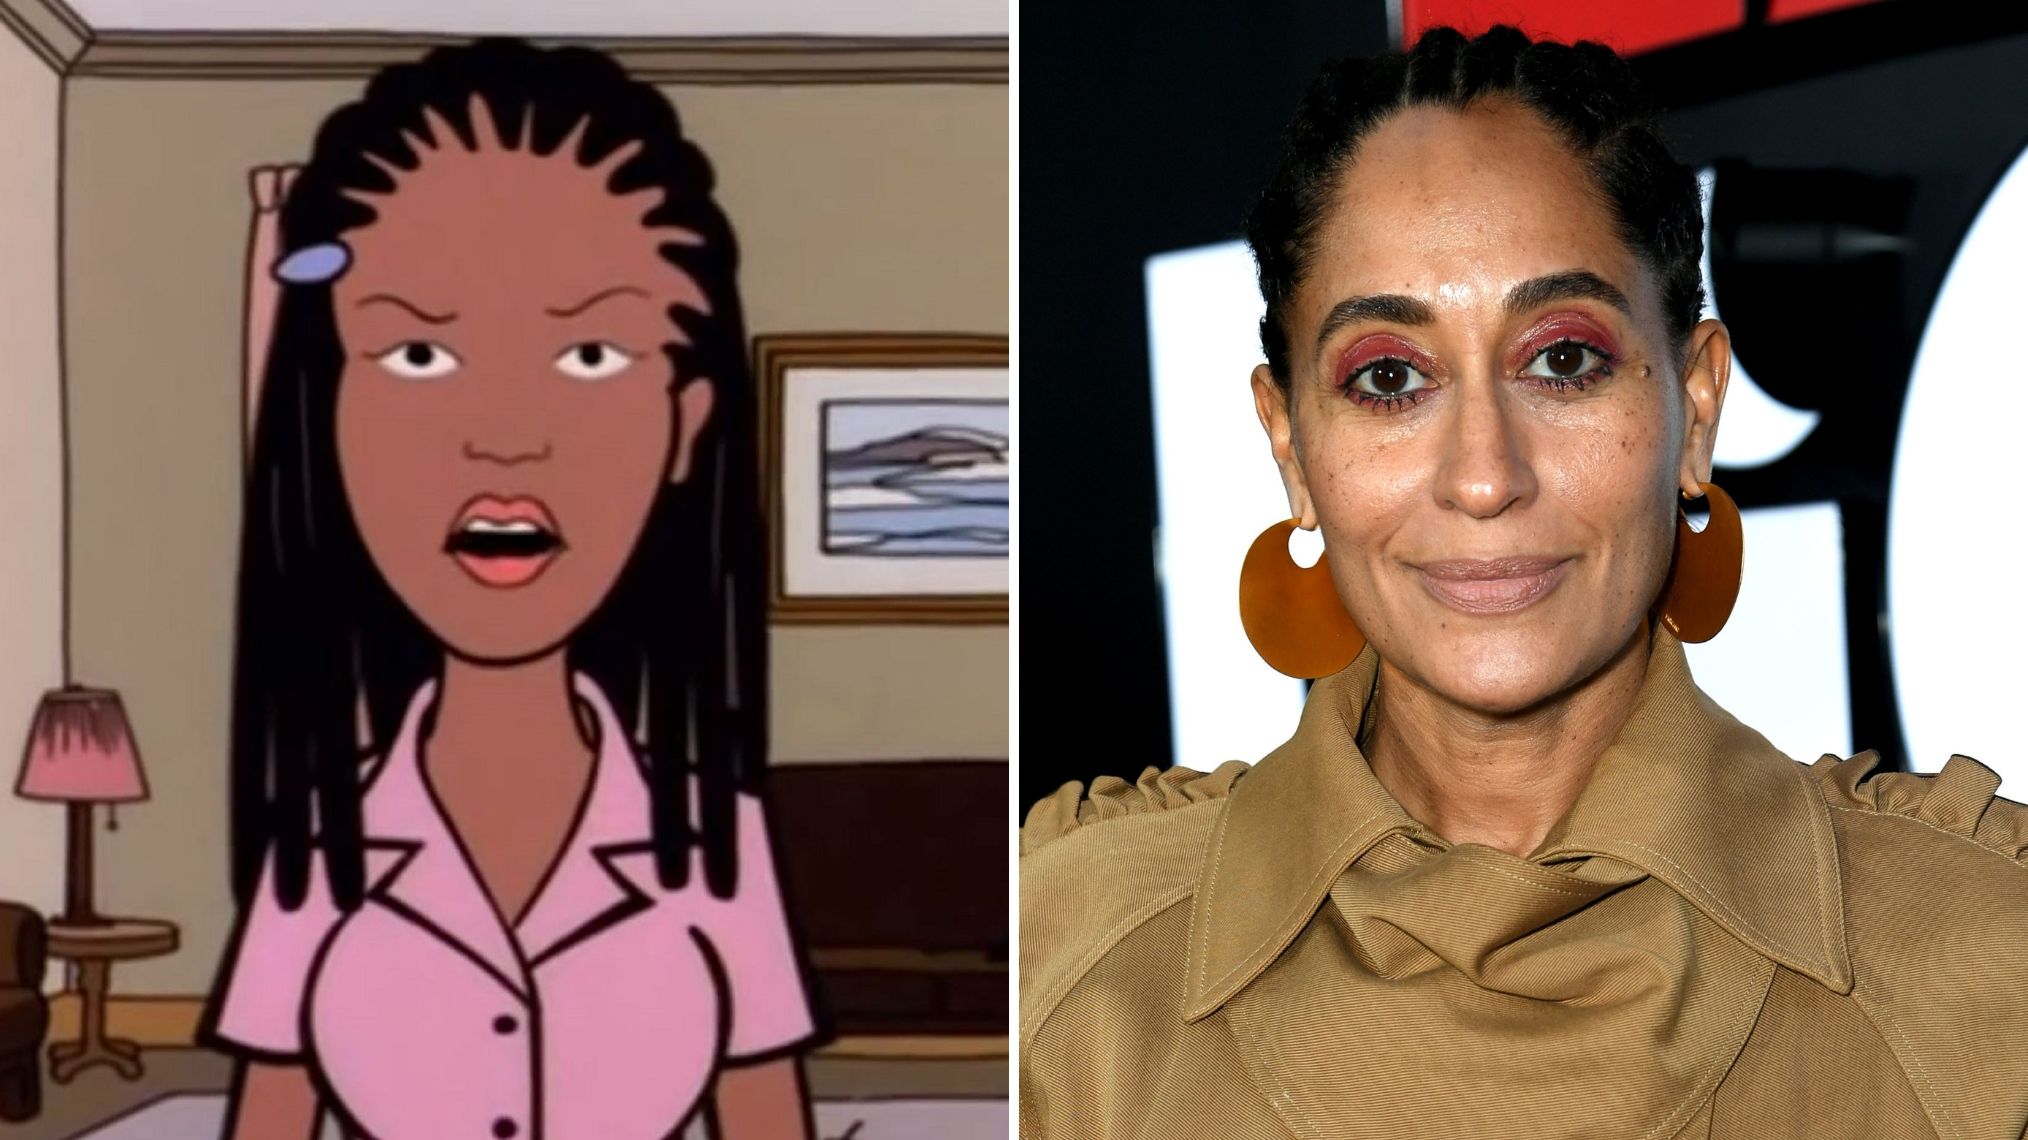 Jodie from 'Daria' (L) and Tracee Ellis Ross (R)